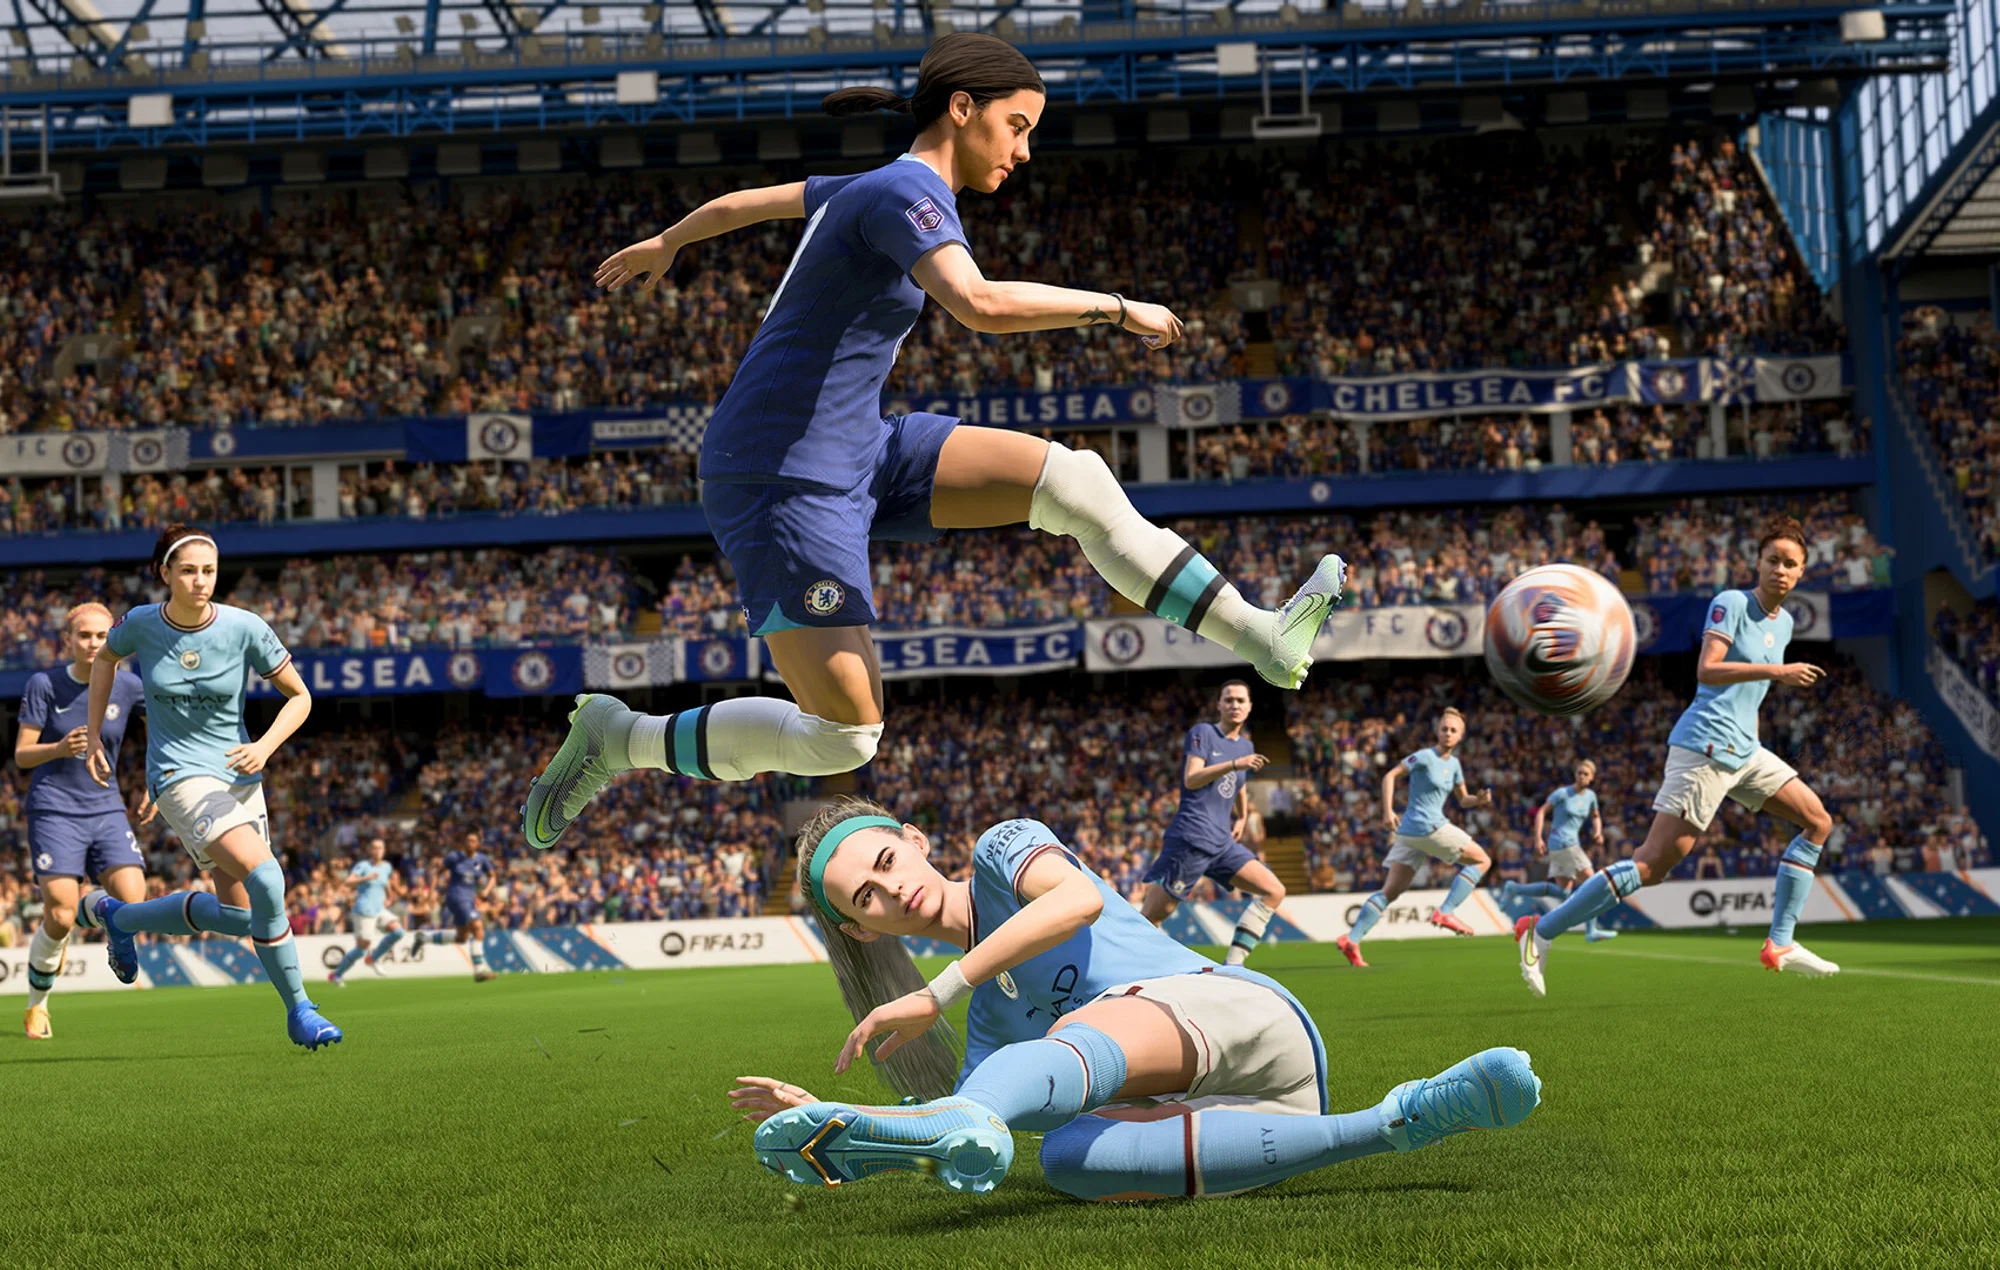 FIFA 23 is free to play? Check out what we already know about one of the hottest premieres this year